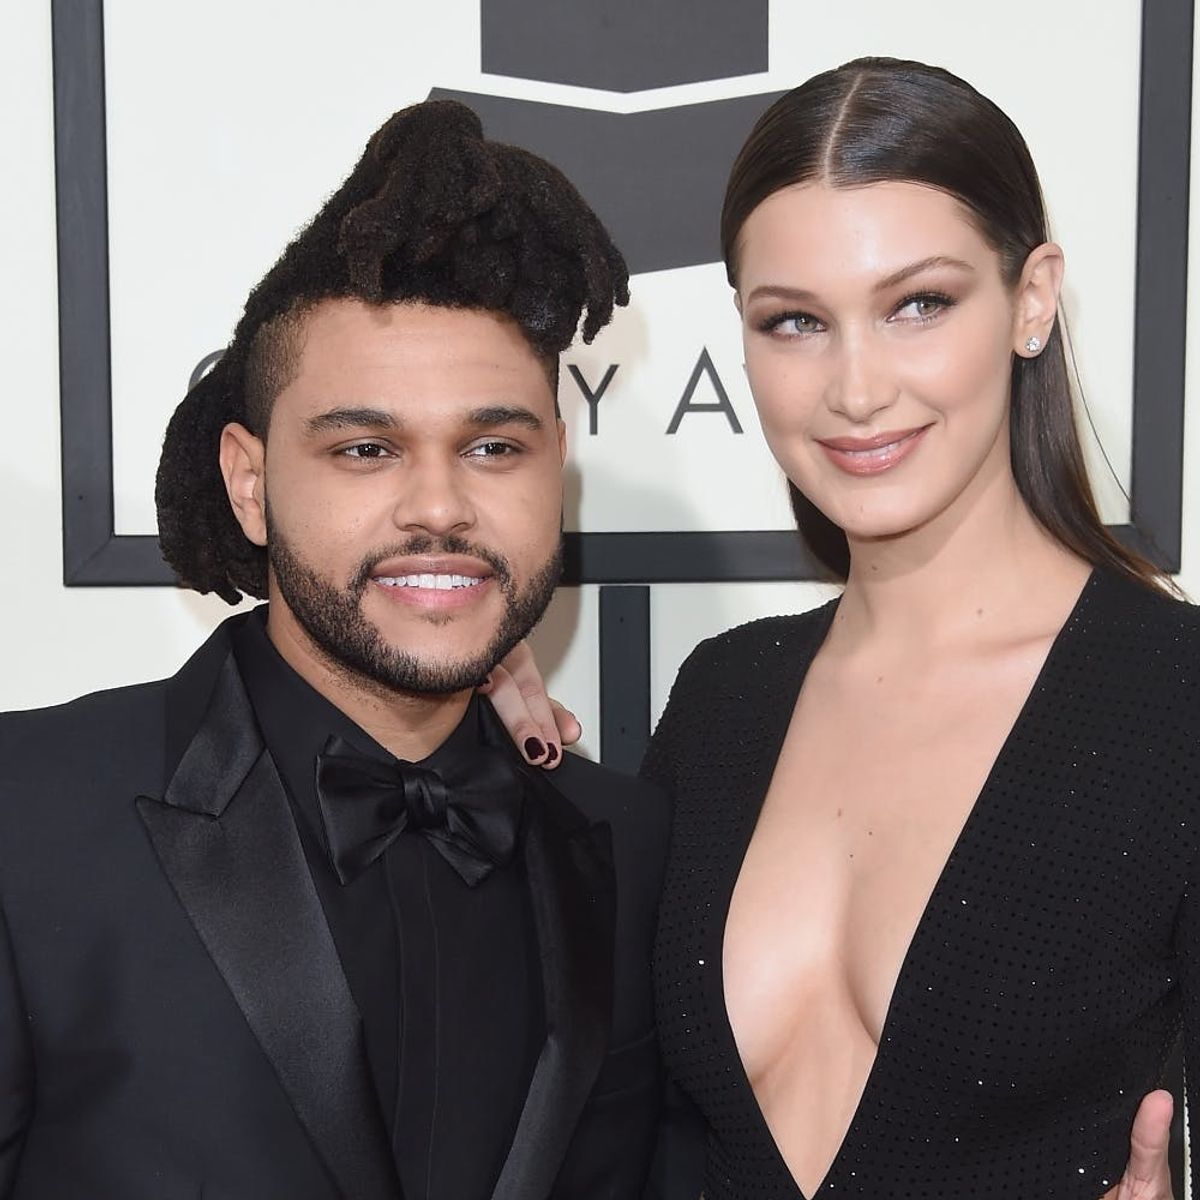 Bella Hadid and The Weeknd Split Up Just Weeks Before These Two Major Events